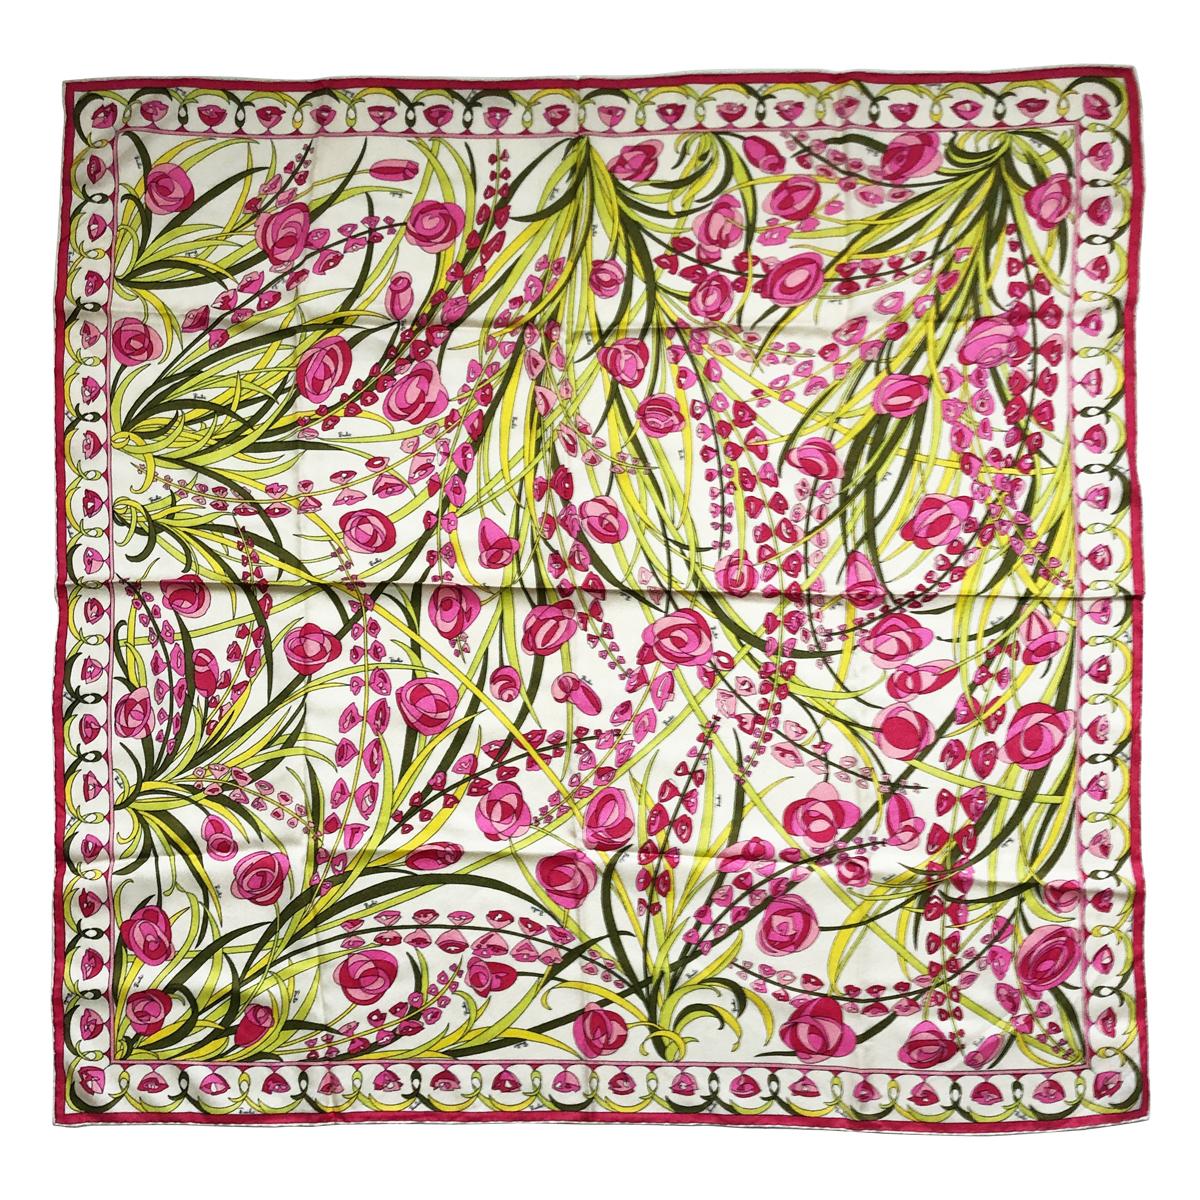 How do I tie an Emilio Pucci scarf?